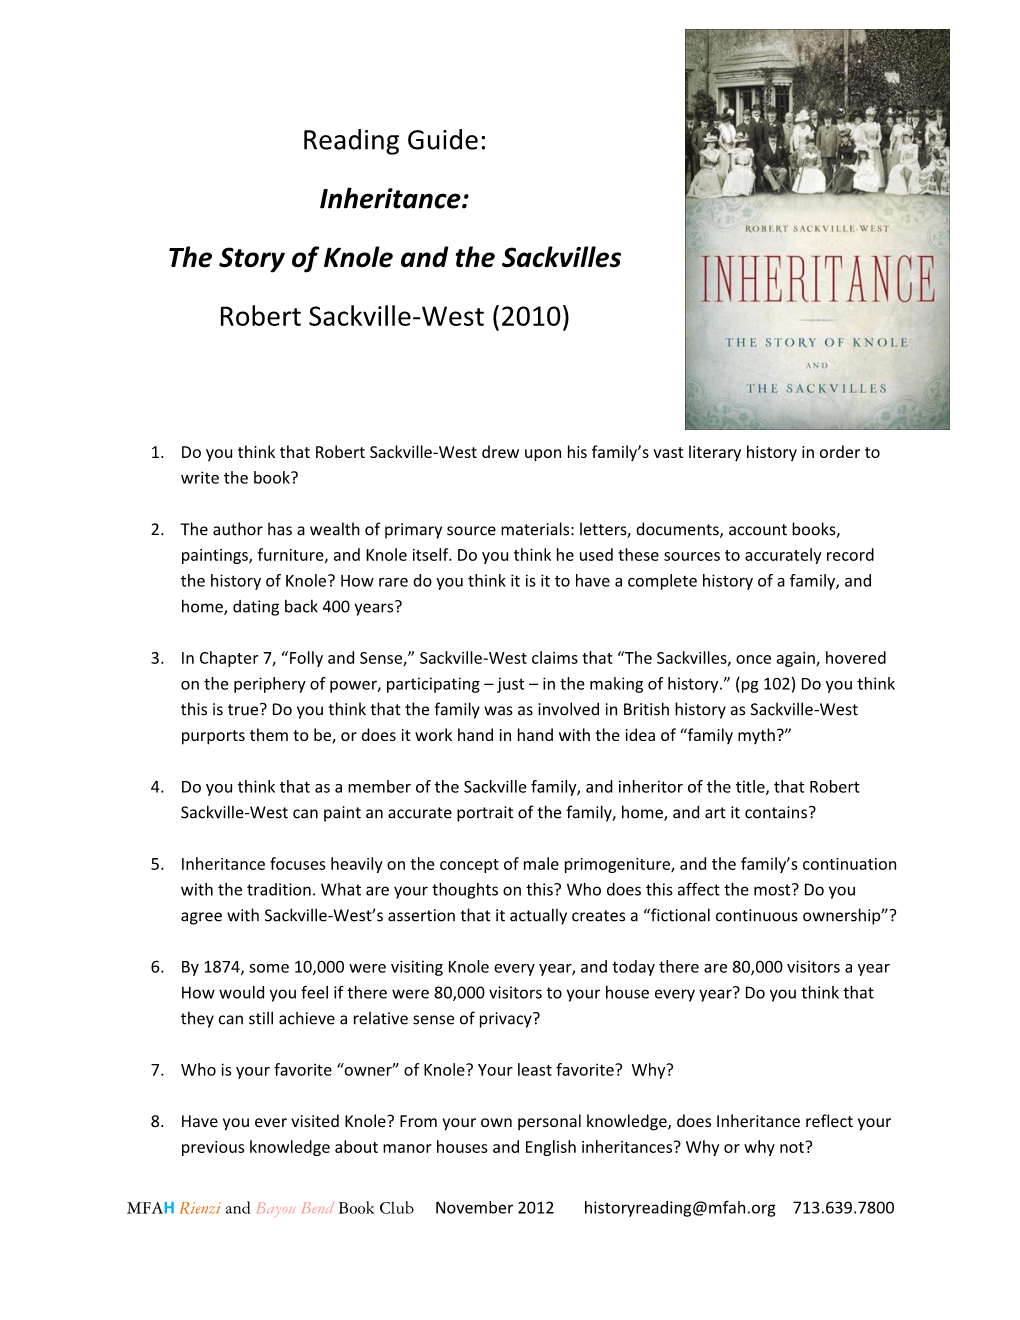 Reading Guide: Inheritance: the Story of Knole and the Sackvilles Robert Sackville-West (2010)